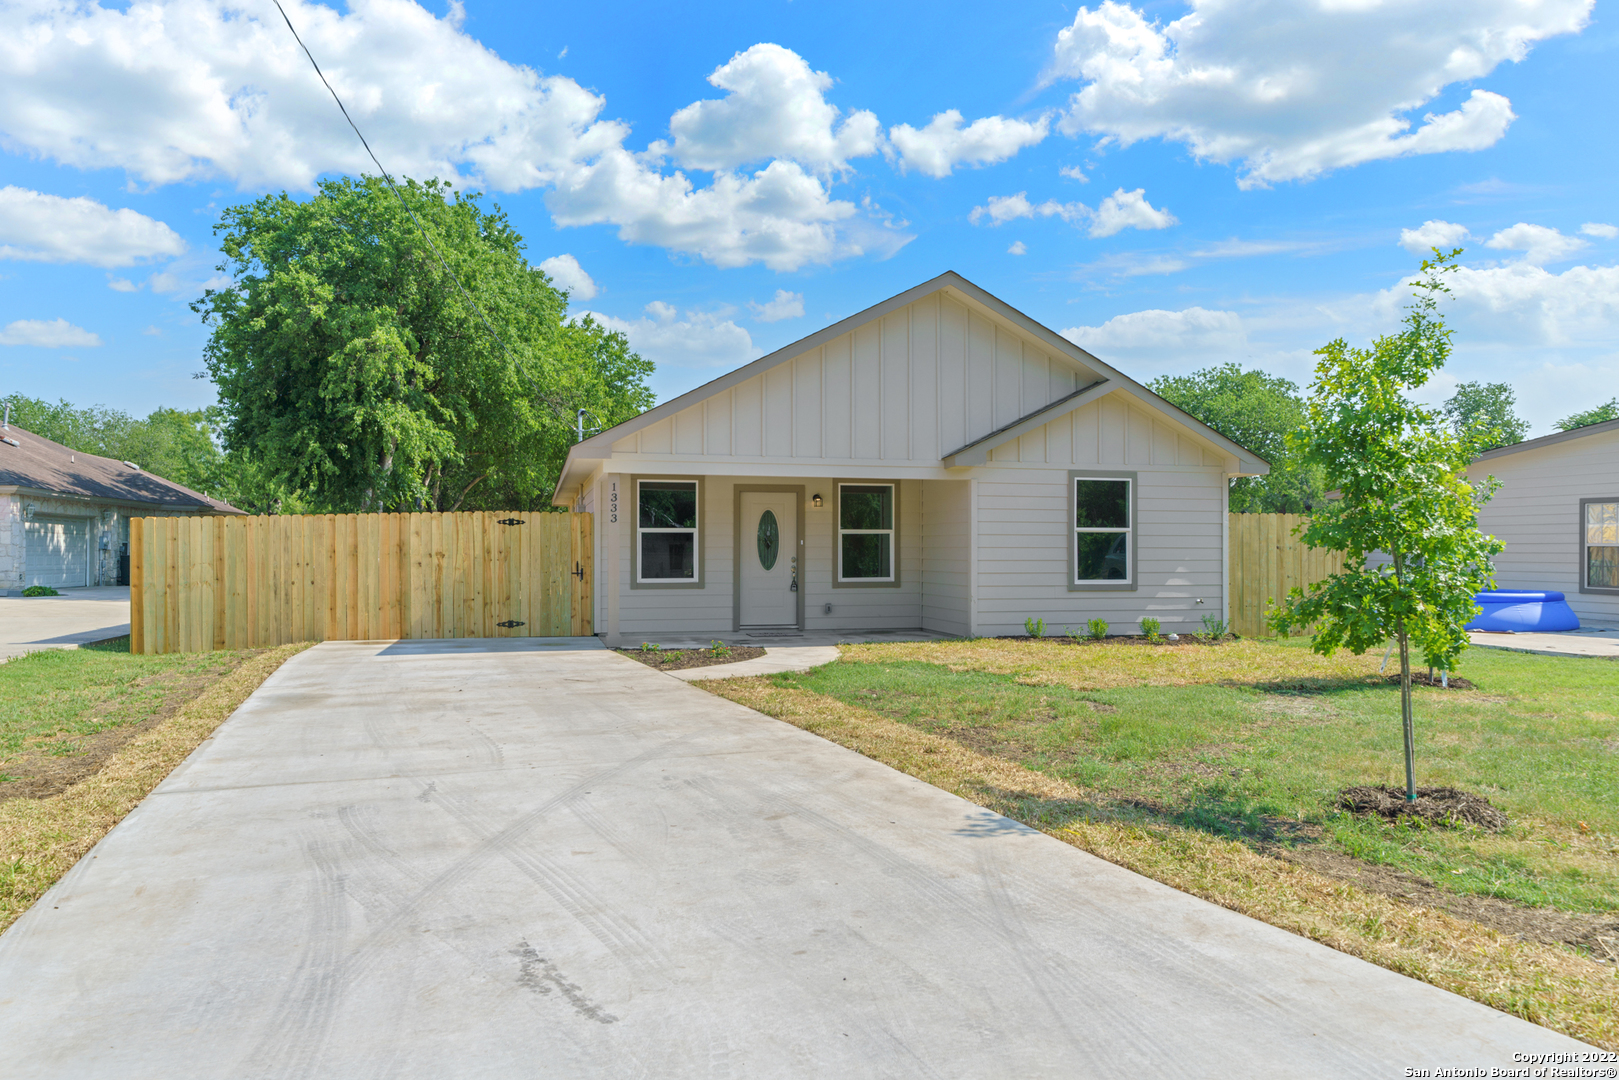 Beautiful, new home built on .314 acres. This house features 3 bedrooms, 2 baths and an open floorplan that is great for entertaining. Move in ready!